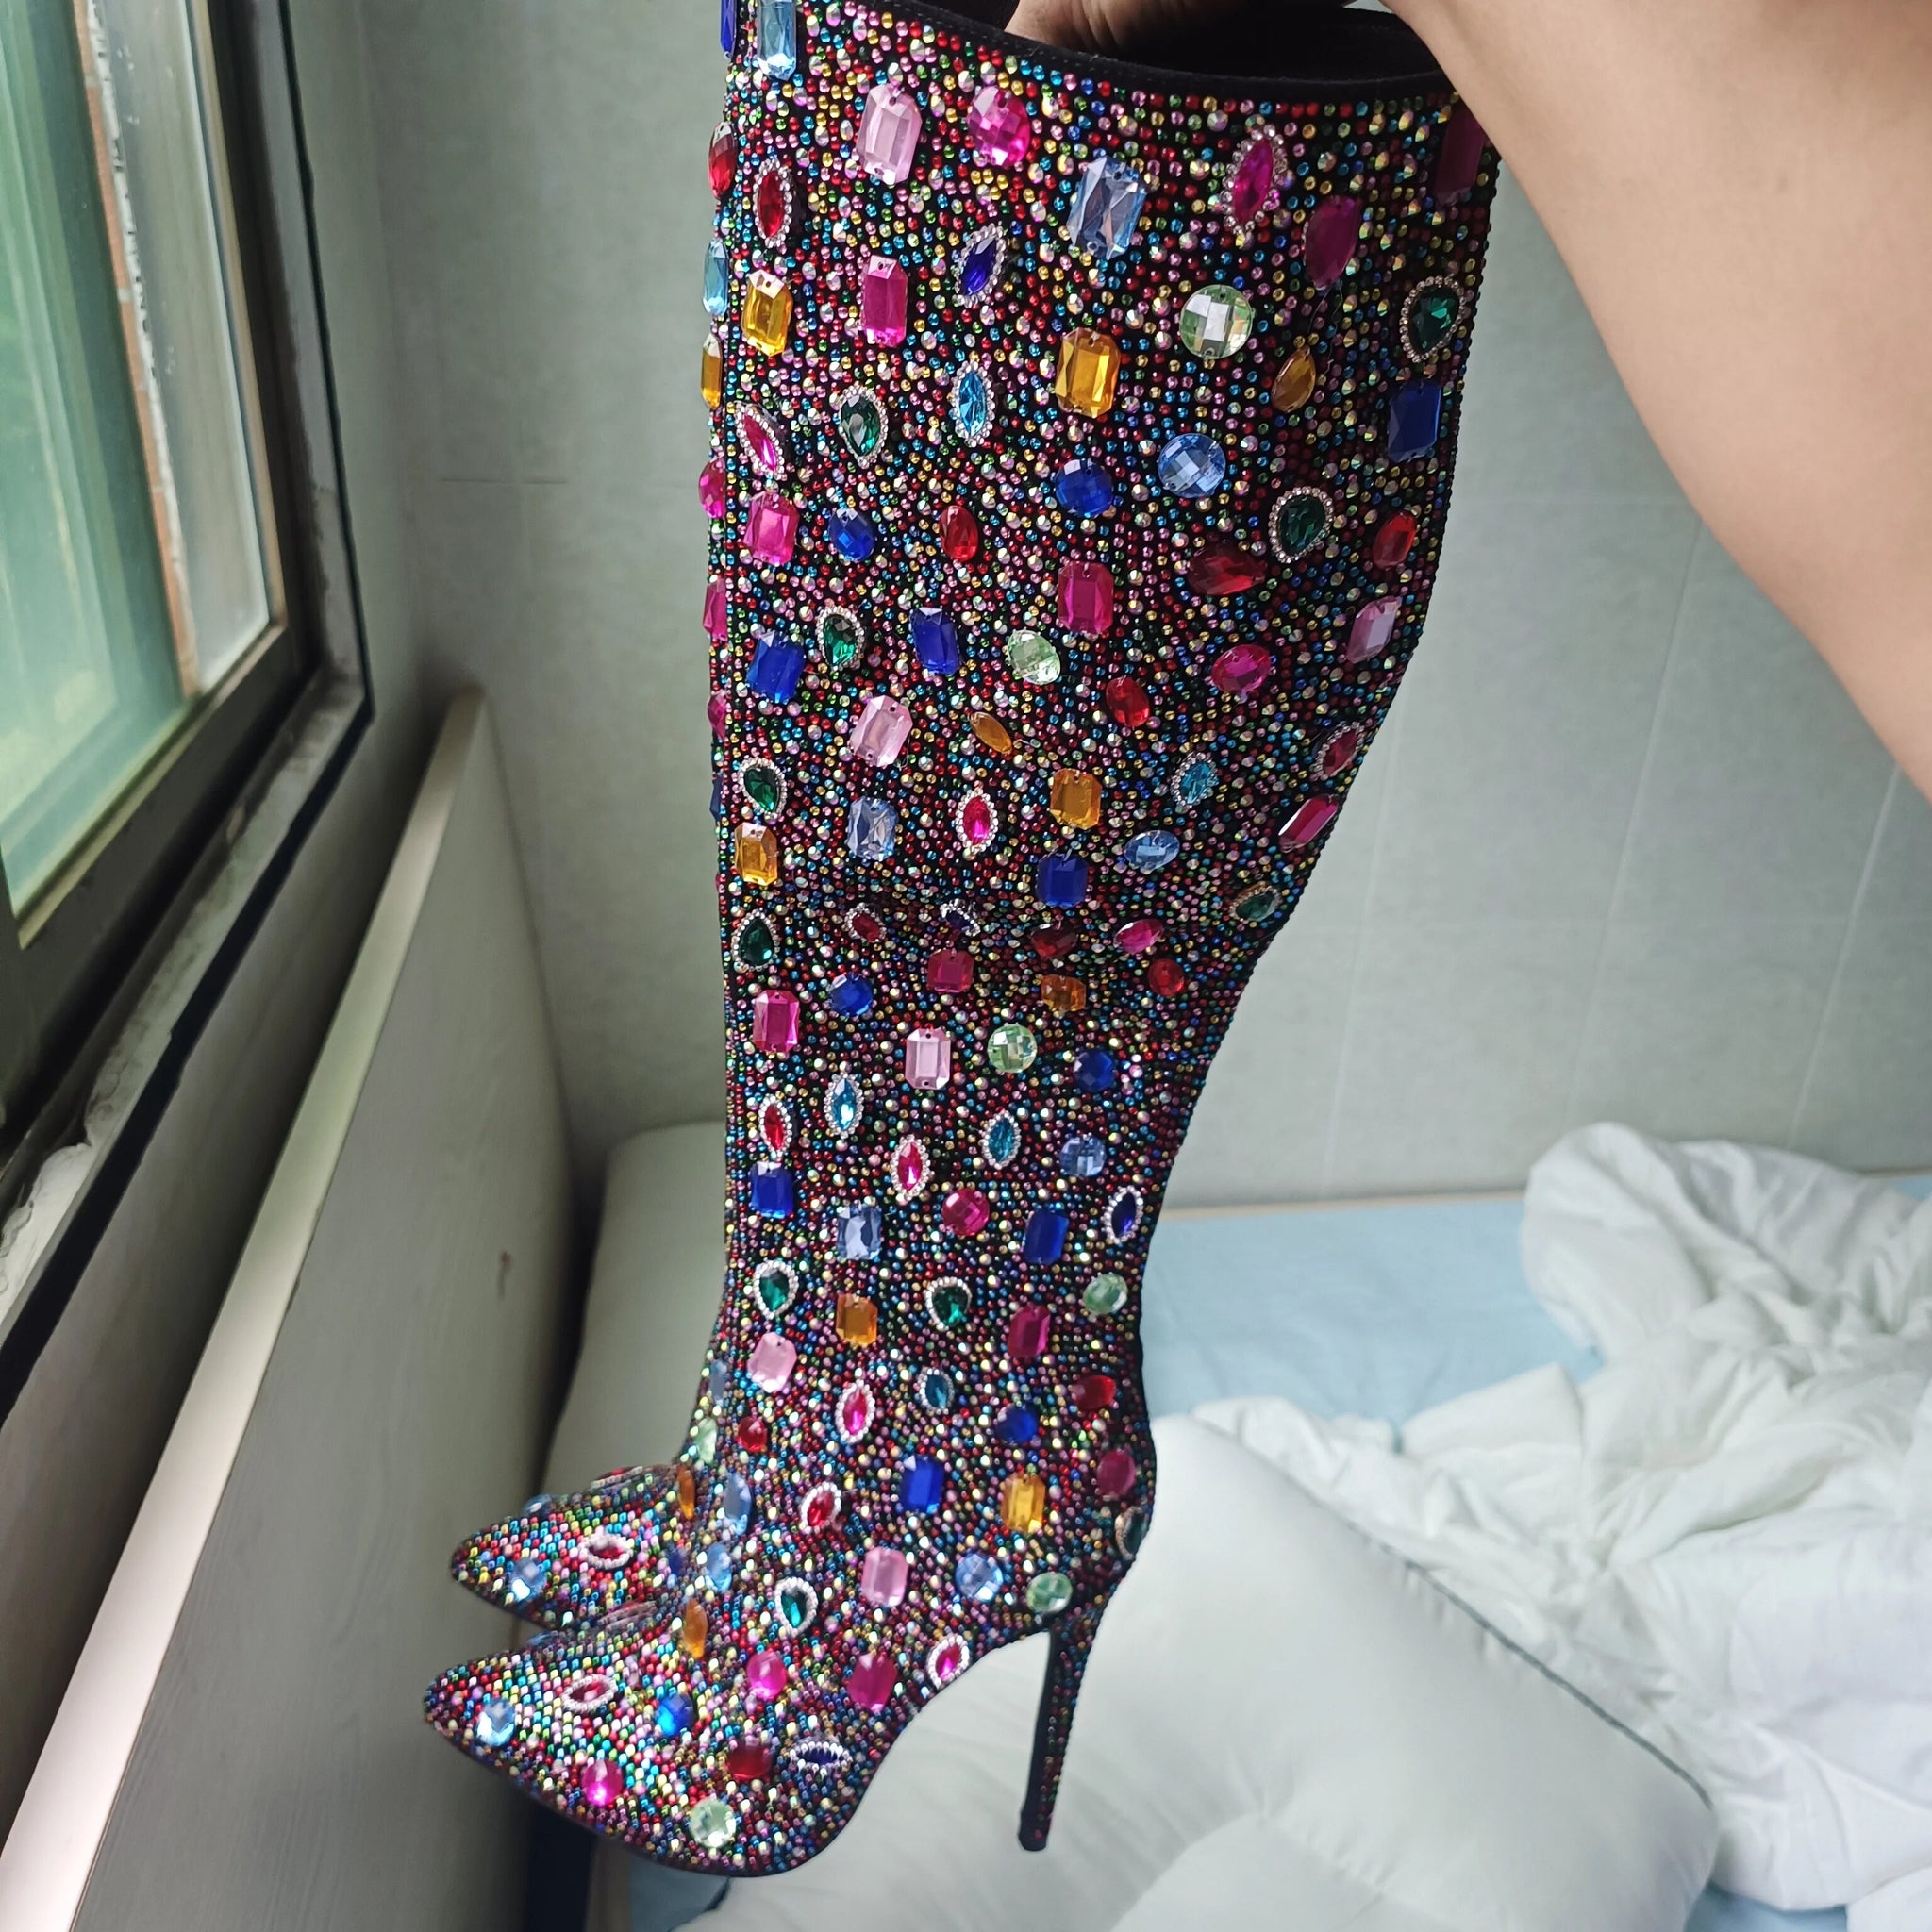 Bling Crystal Knee High Boots